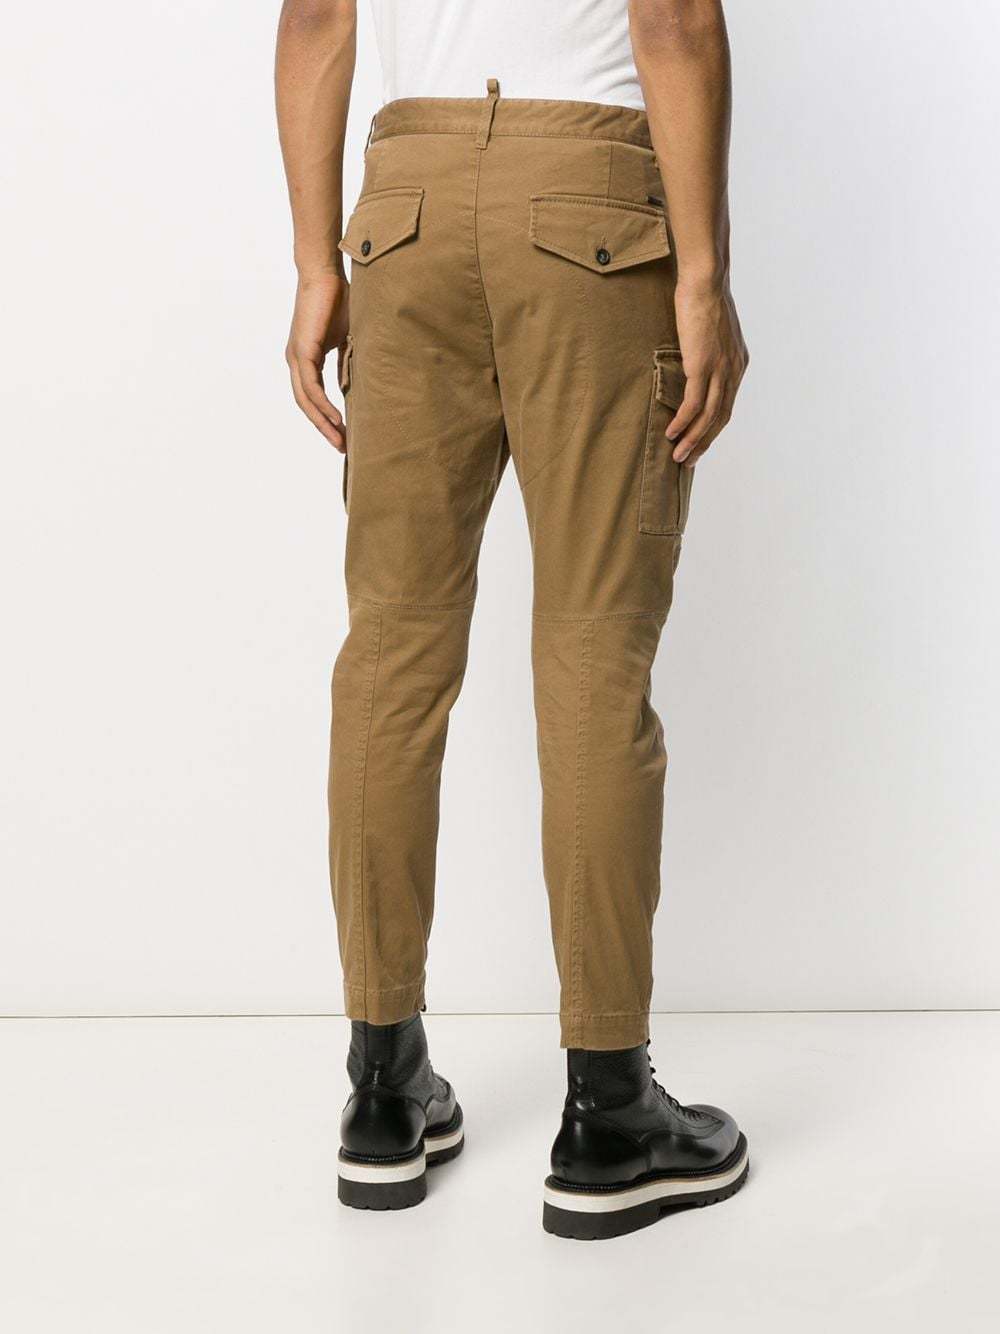 DSQUARED2 Tapered Leg Chinos, $338 | farfetch.com | Lookastic